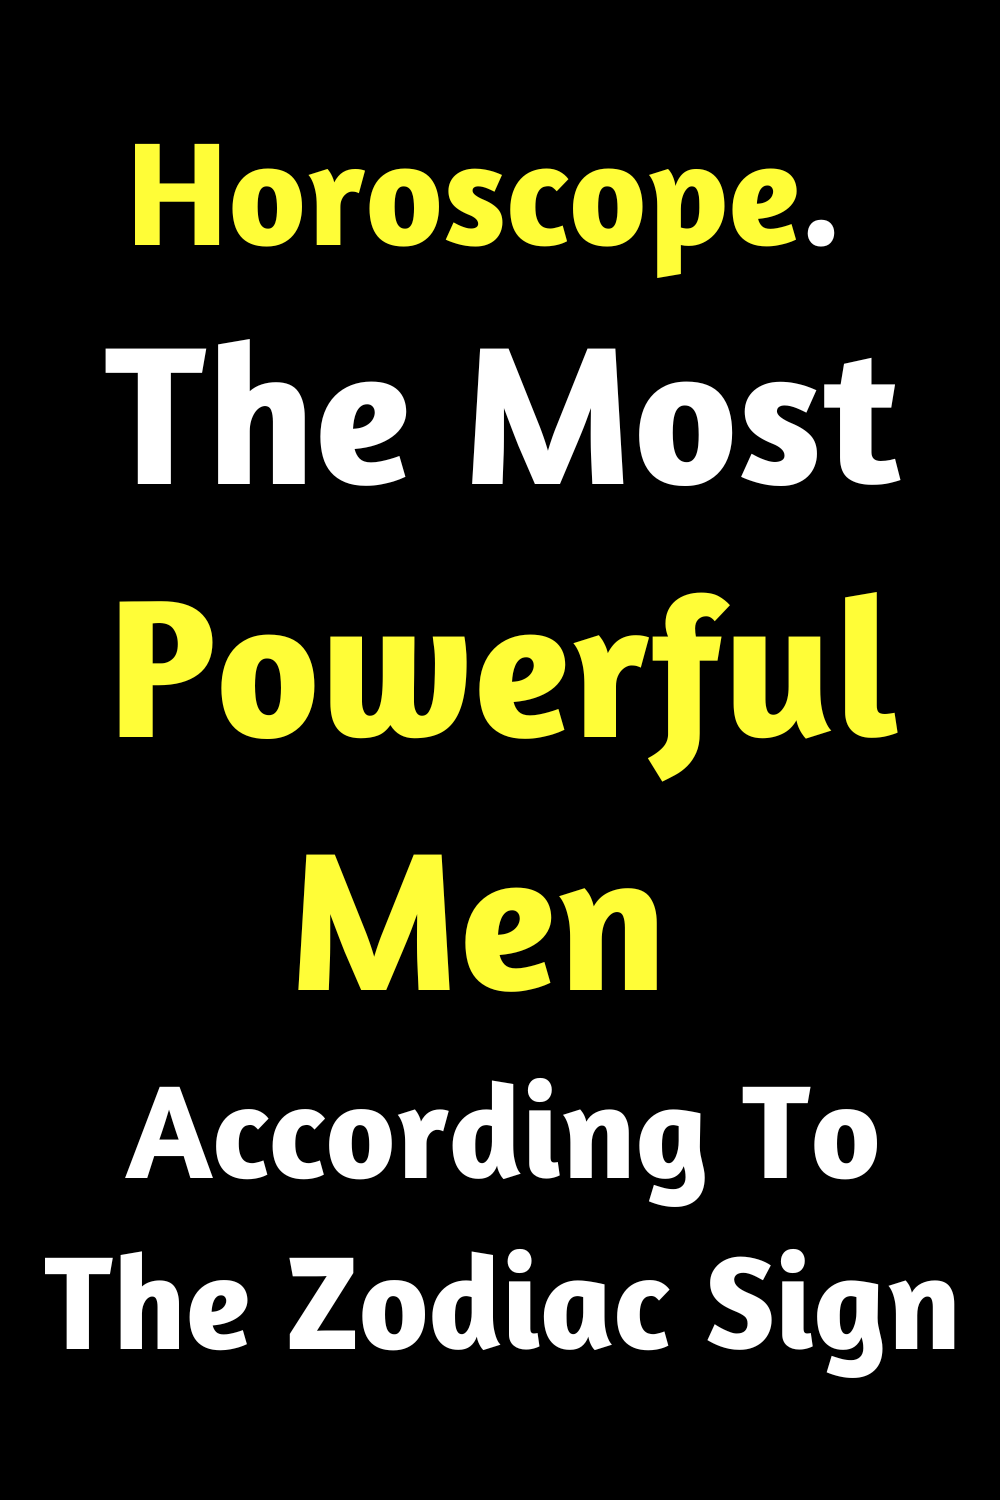 Horoscope. The Most Powerful Men According To The Zodiac Sign